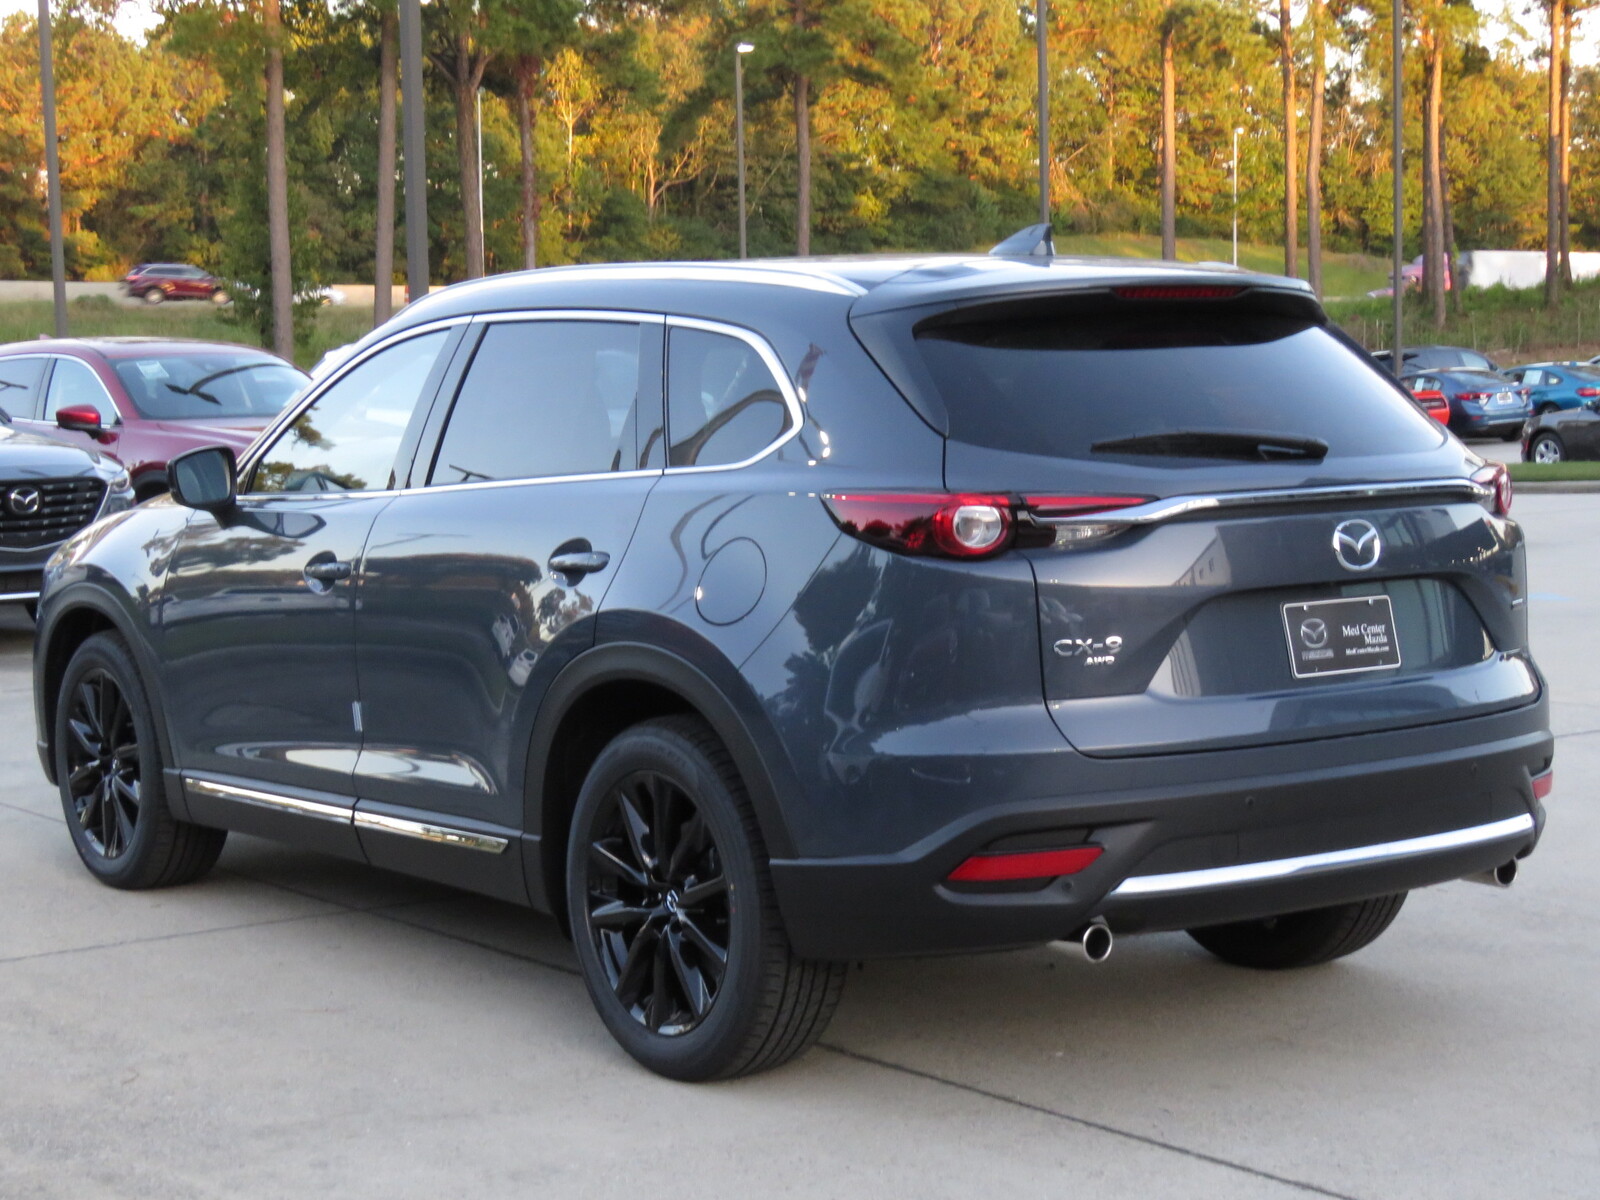 New 2021 MAZDA CX-9 Carbon Edition AWD SUV in Pelham #M16023 | Med ...